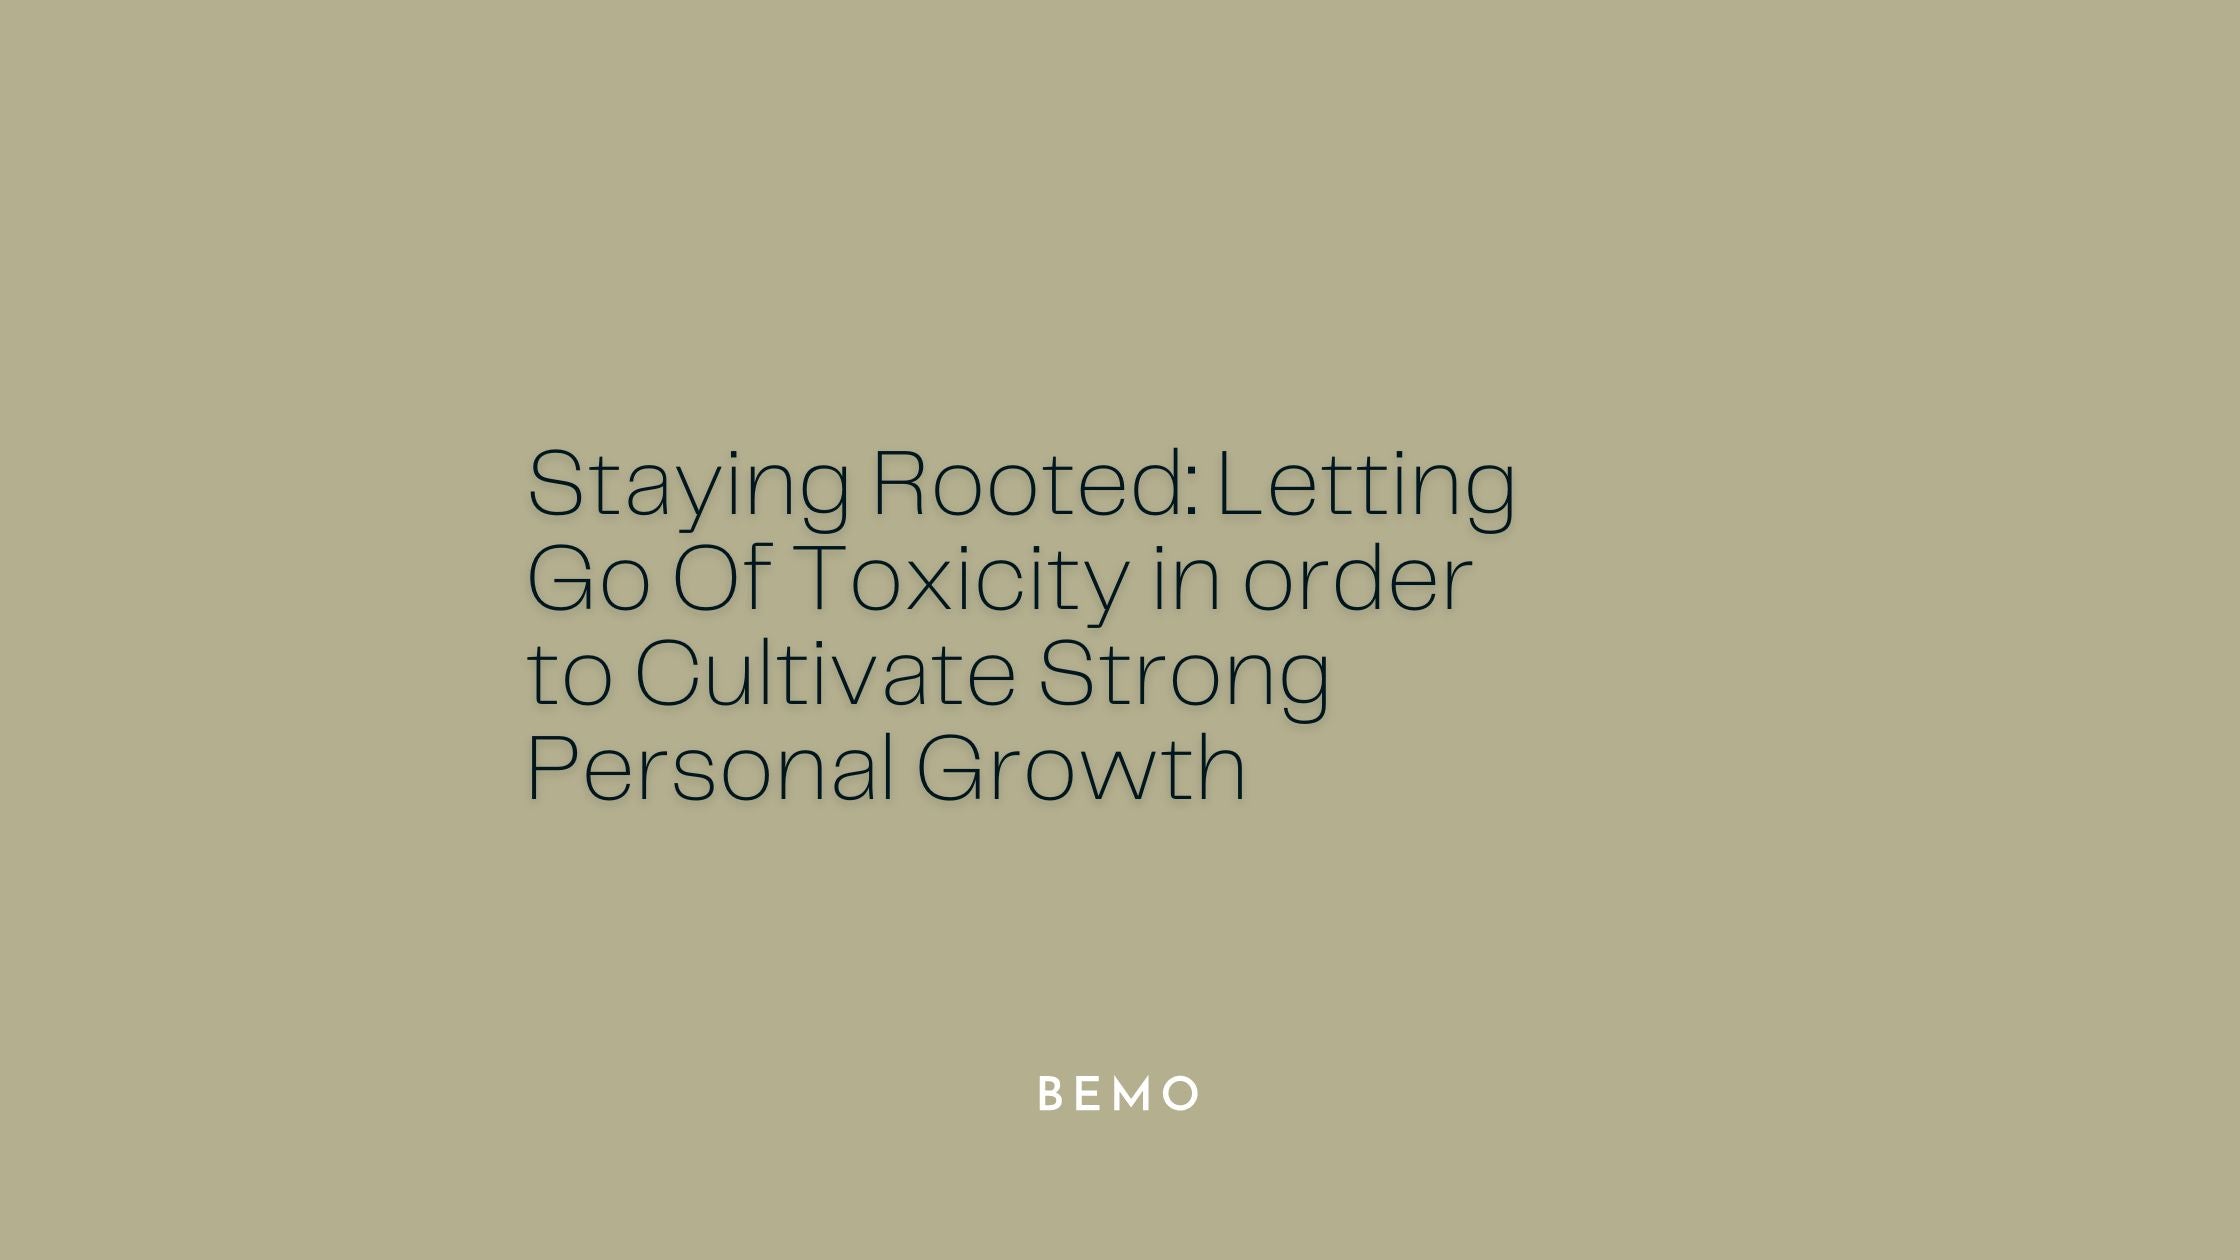 Staying Rooted: Letting Go Of Toxicity in order to Cultivate Strong Personal Growth